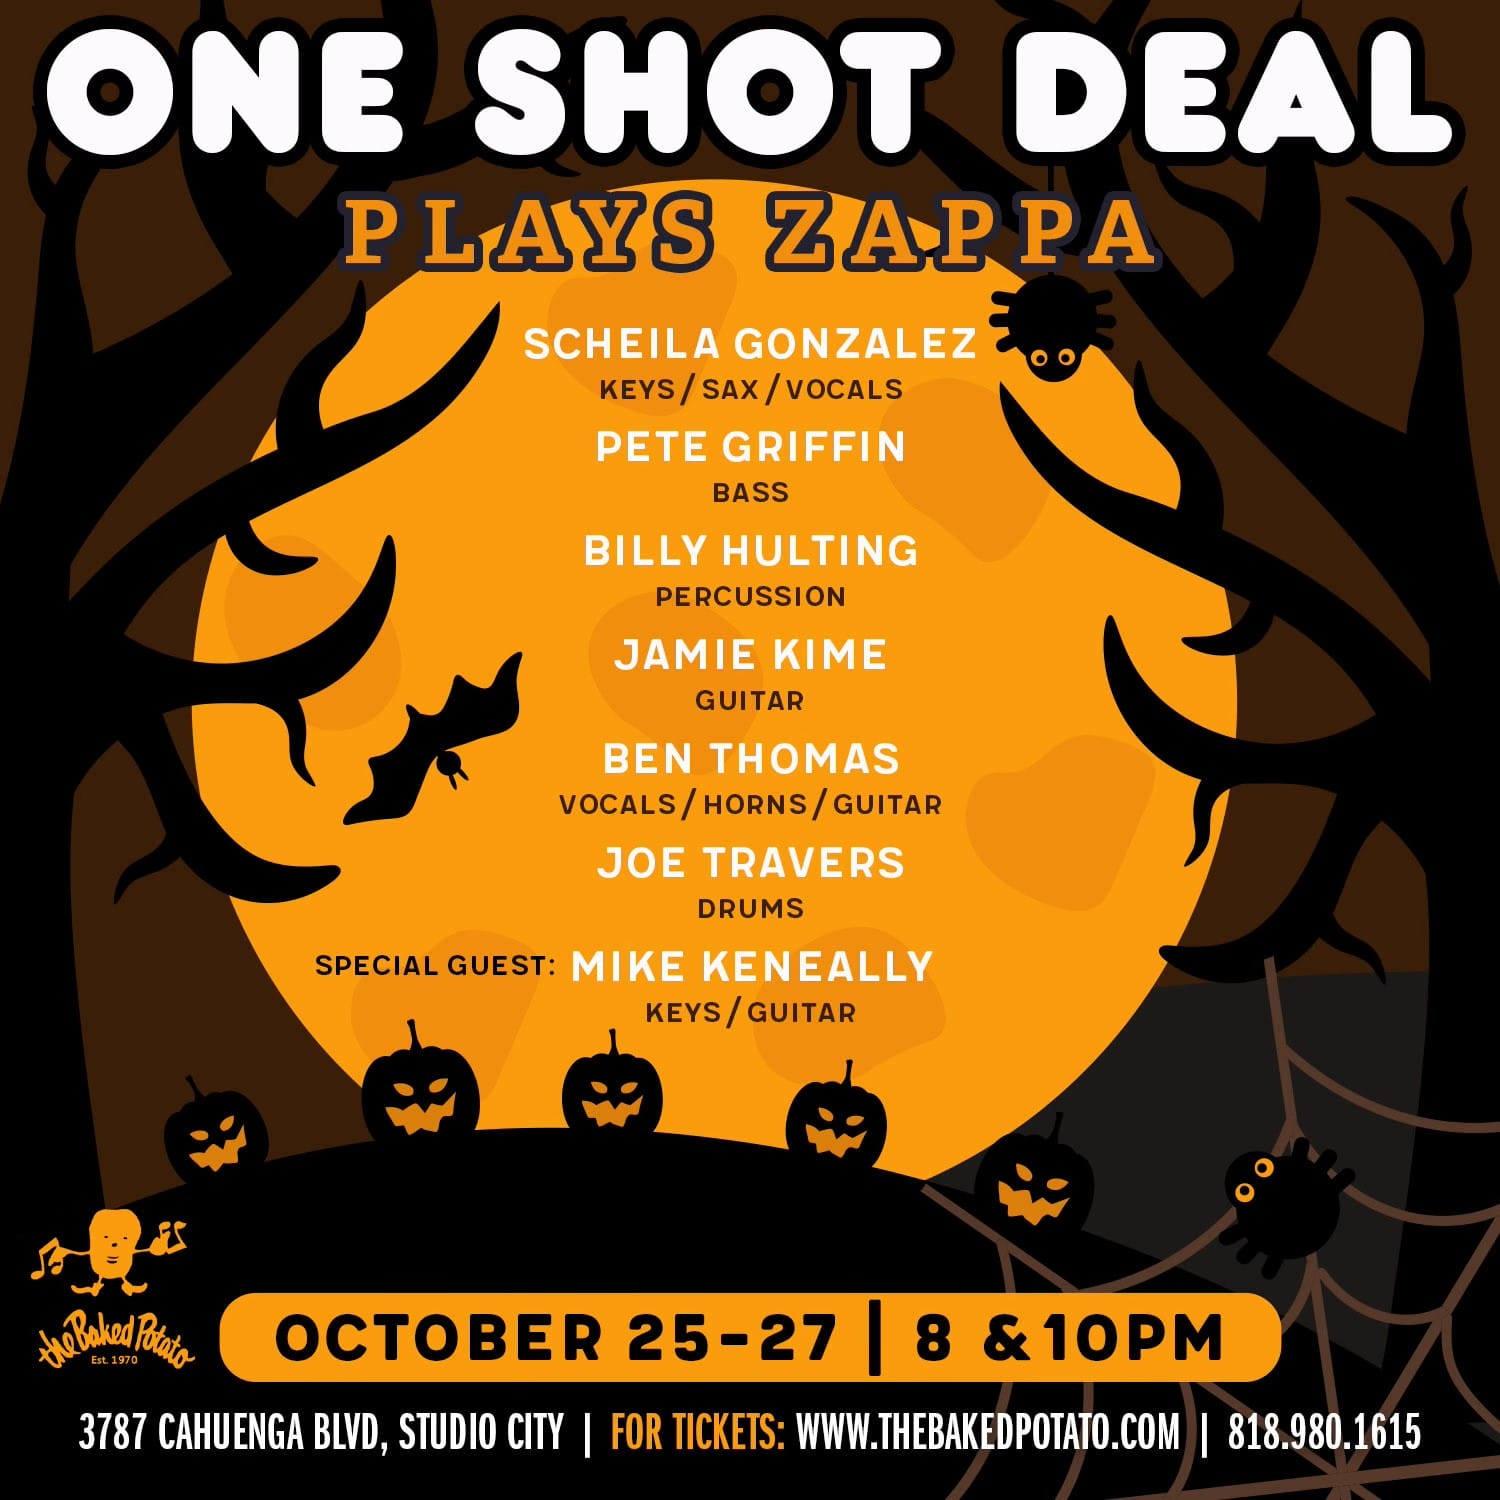 ONE SHOT DEAL Plays ZAPPA - Wednesday, October 25, 2023